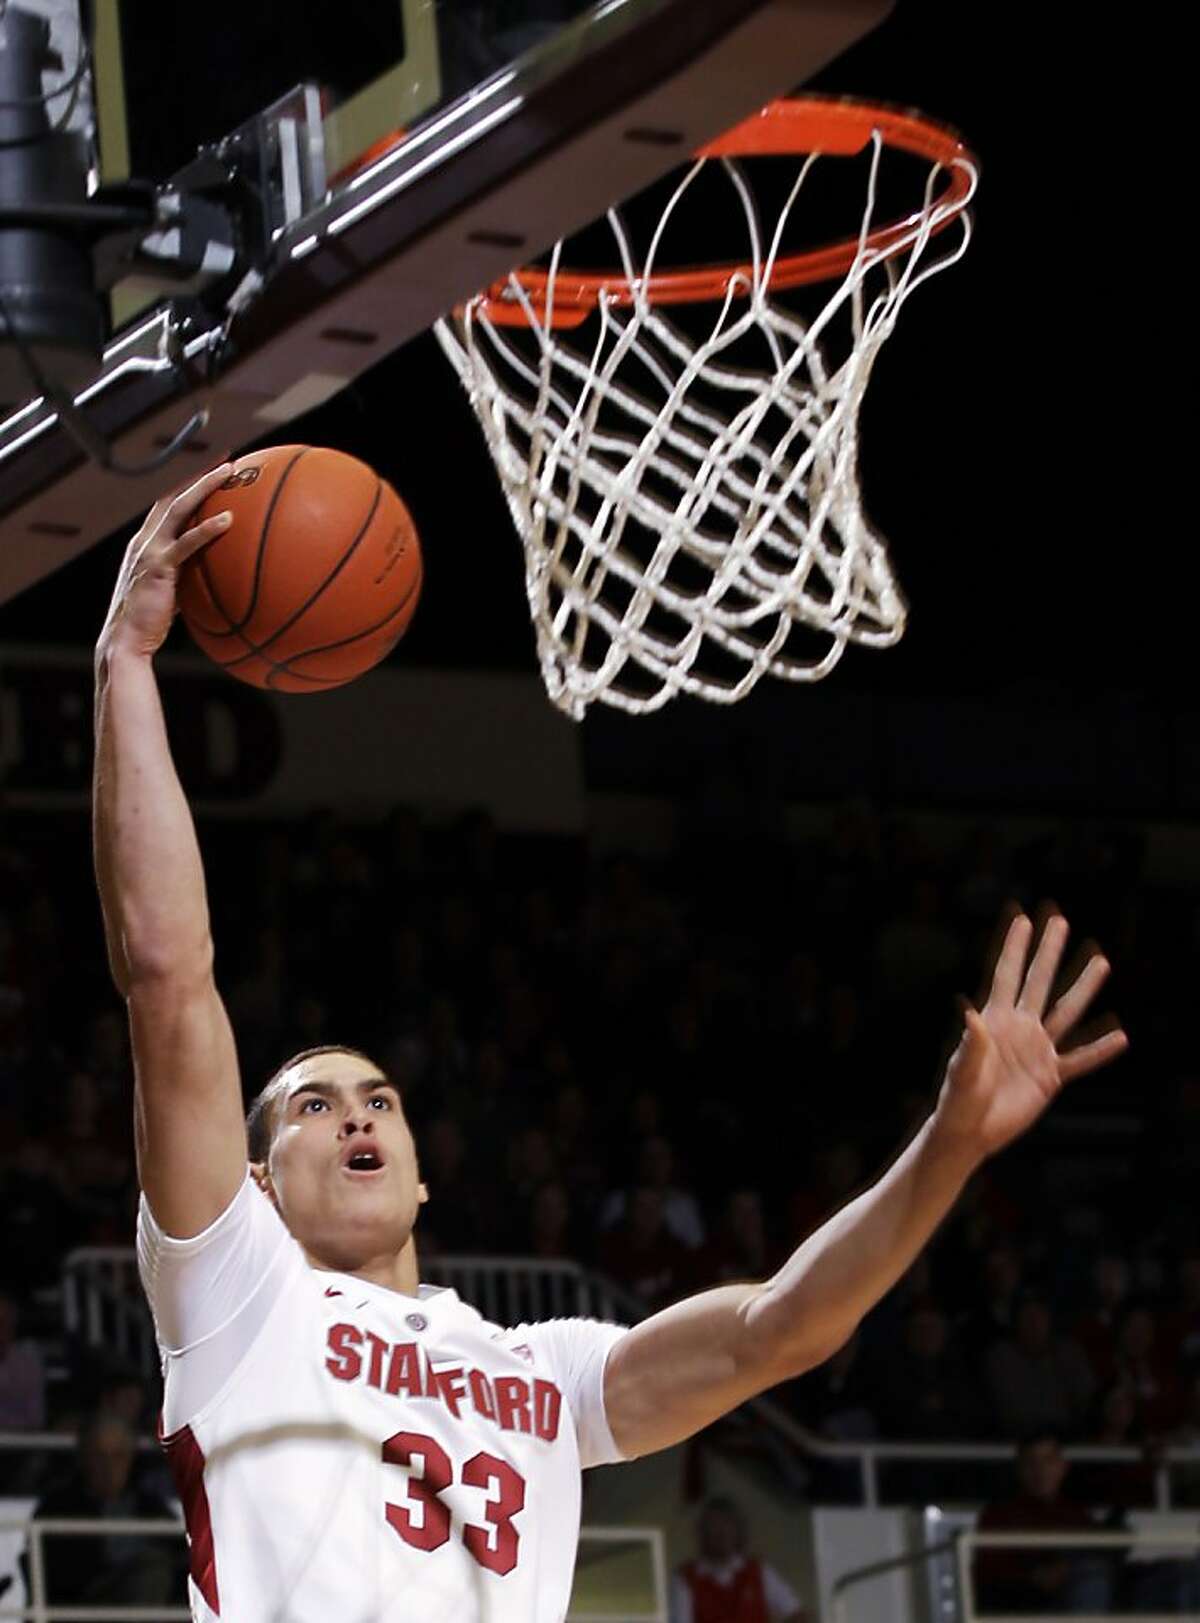 Stanford forward Dwight Powell (33) dunks the ball against Utah in the first half of an NCAA college basketball game in Stanford, Calif., Thursday, Jan. 12, 2012. (AP Photo/Paul Sakuma)